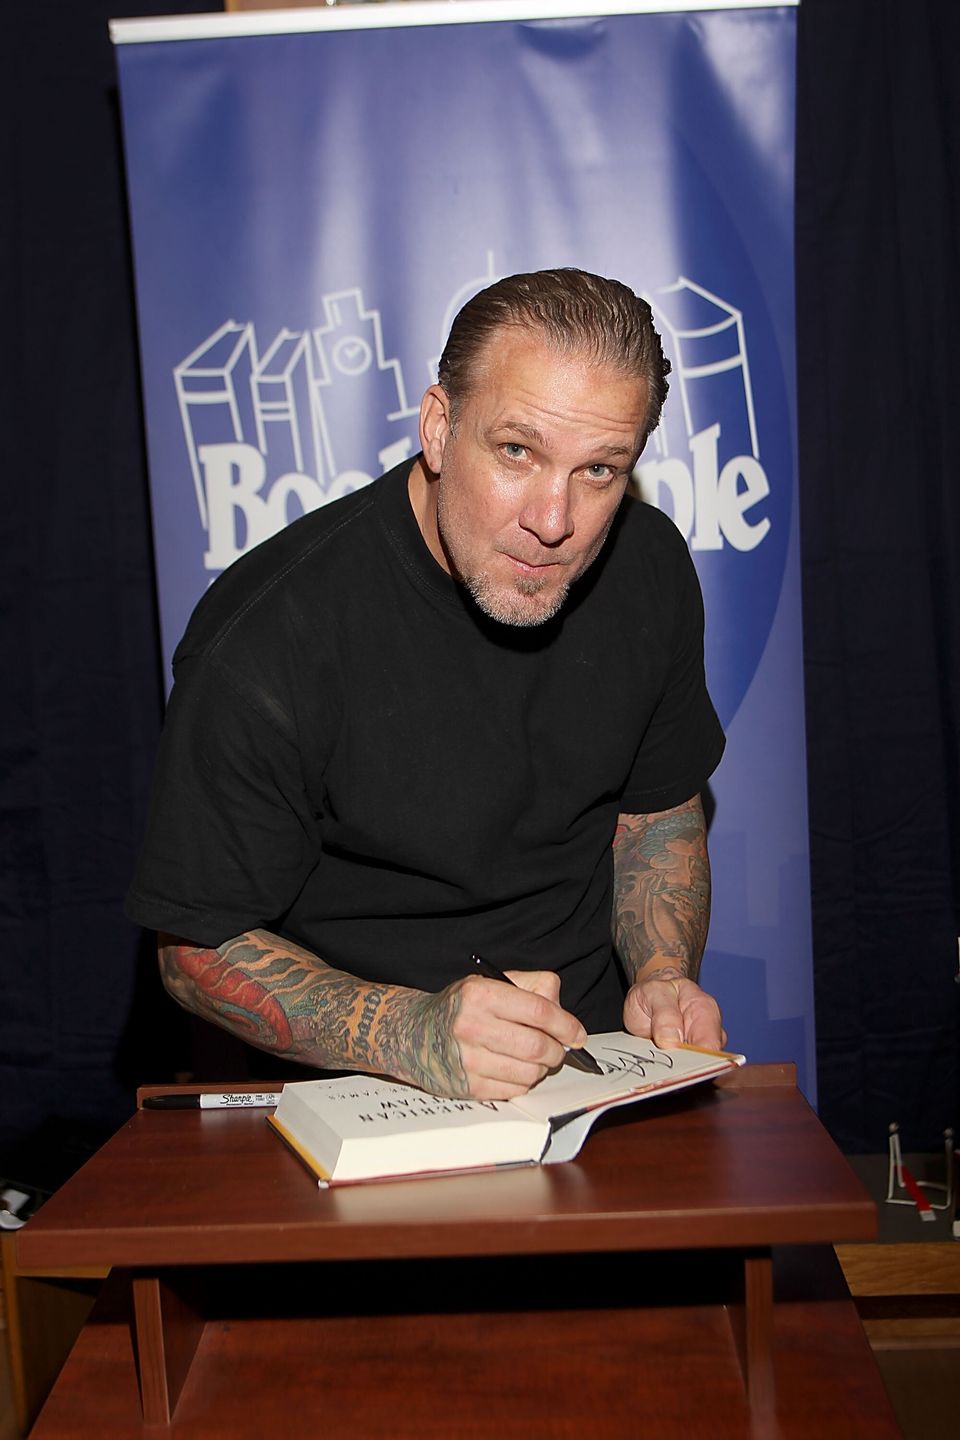 Jesse James Signs Copies Of His New Book "American Outlaw"